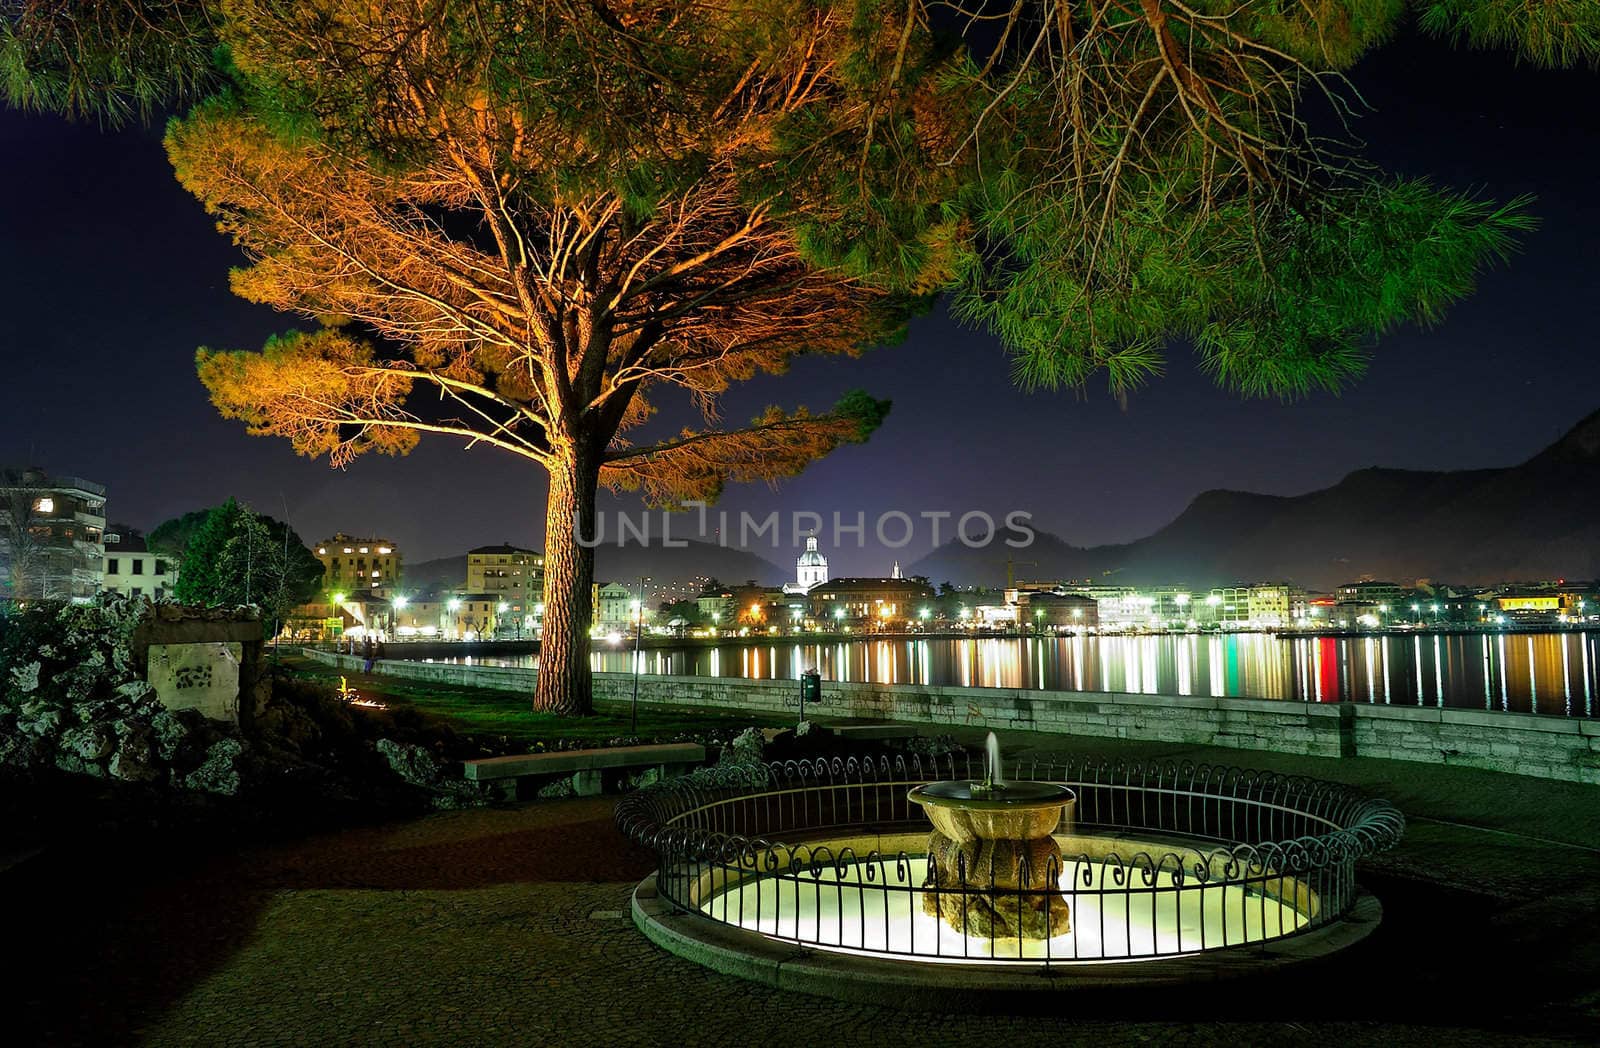 Lakeside city at nigh - Como Italy by Laborer